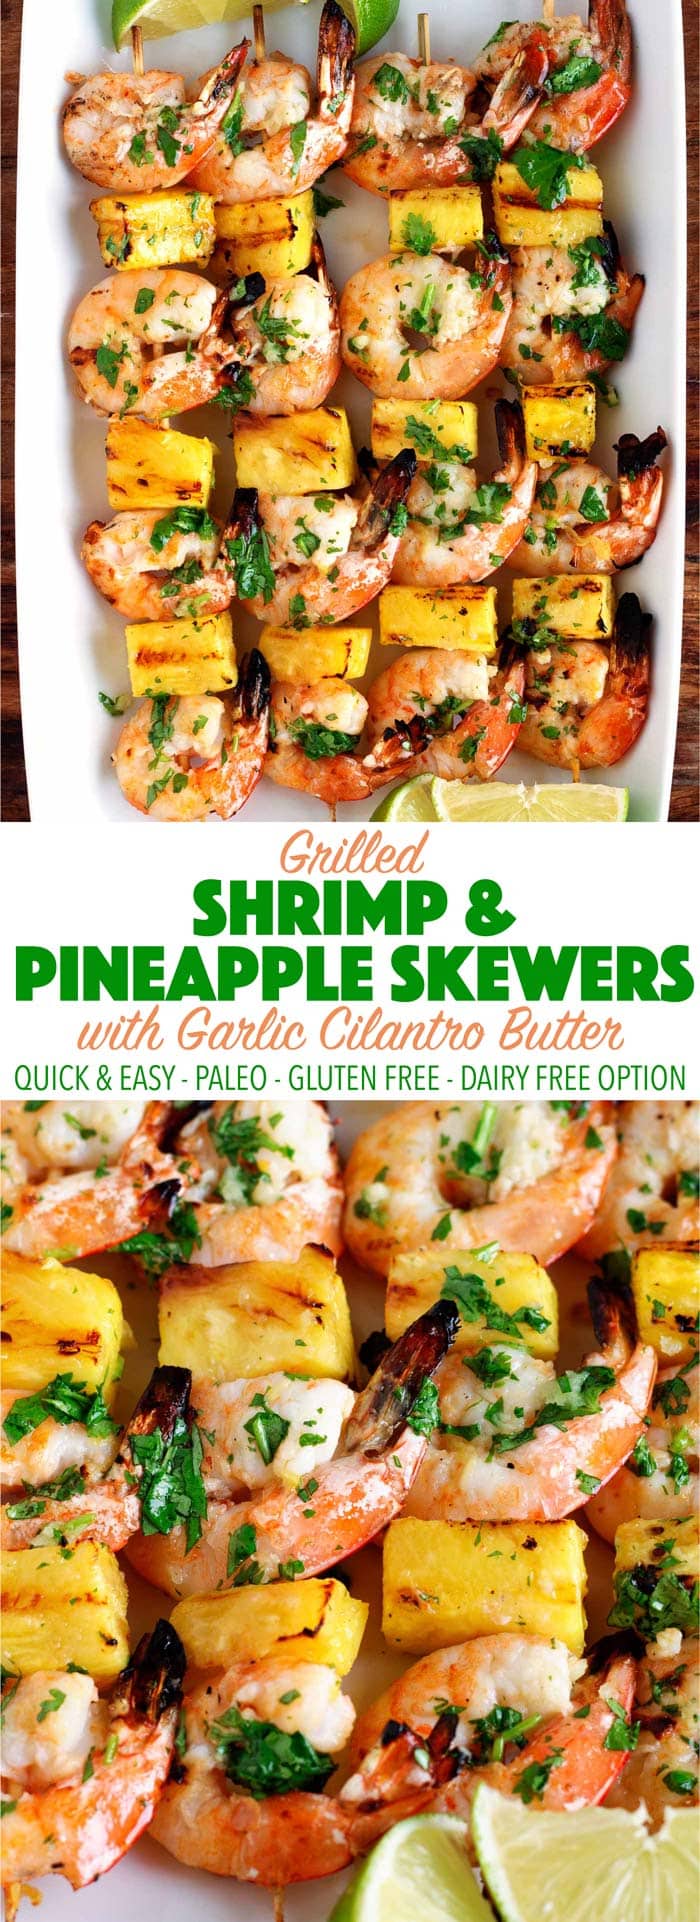 So delicous and easy! Less than 25 mins to make these grilled shrimp and pinapple skewers. Perfect for dinner or a party! Paleo, gluten free, dairy free.